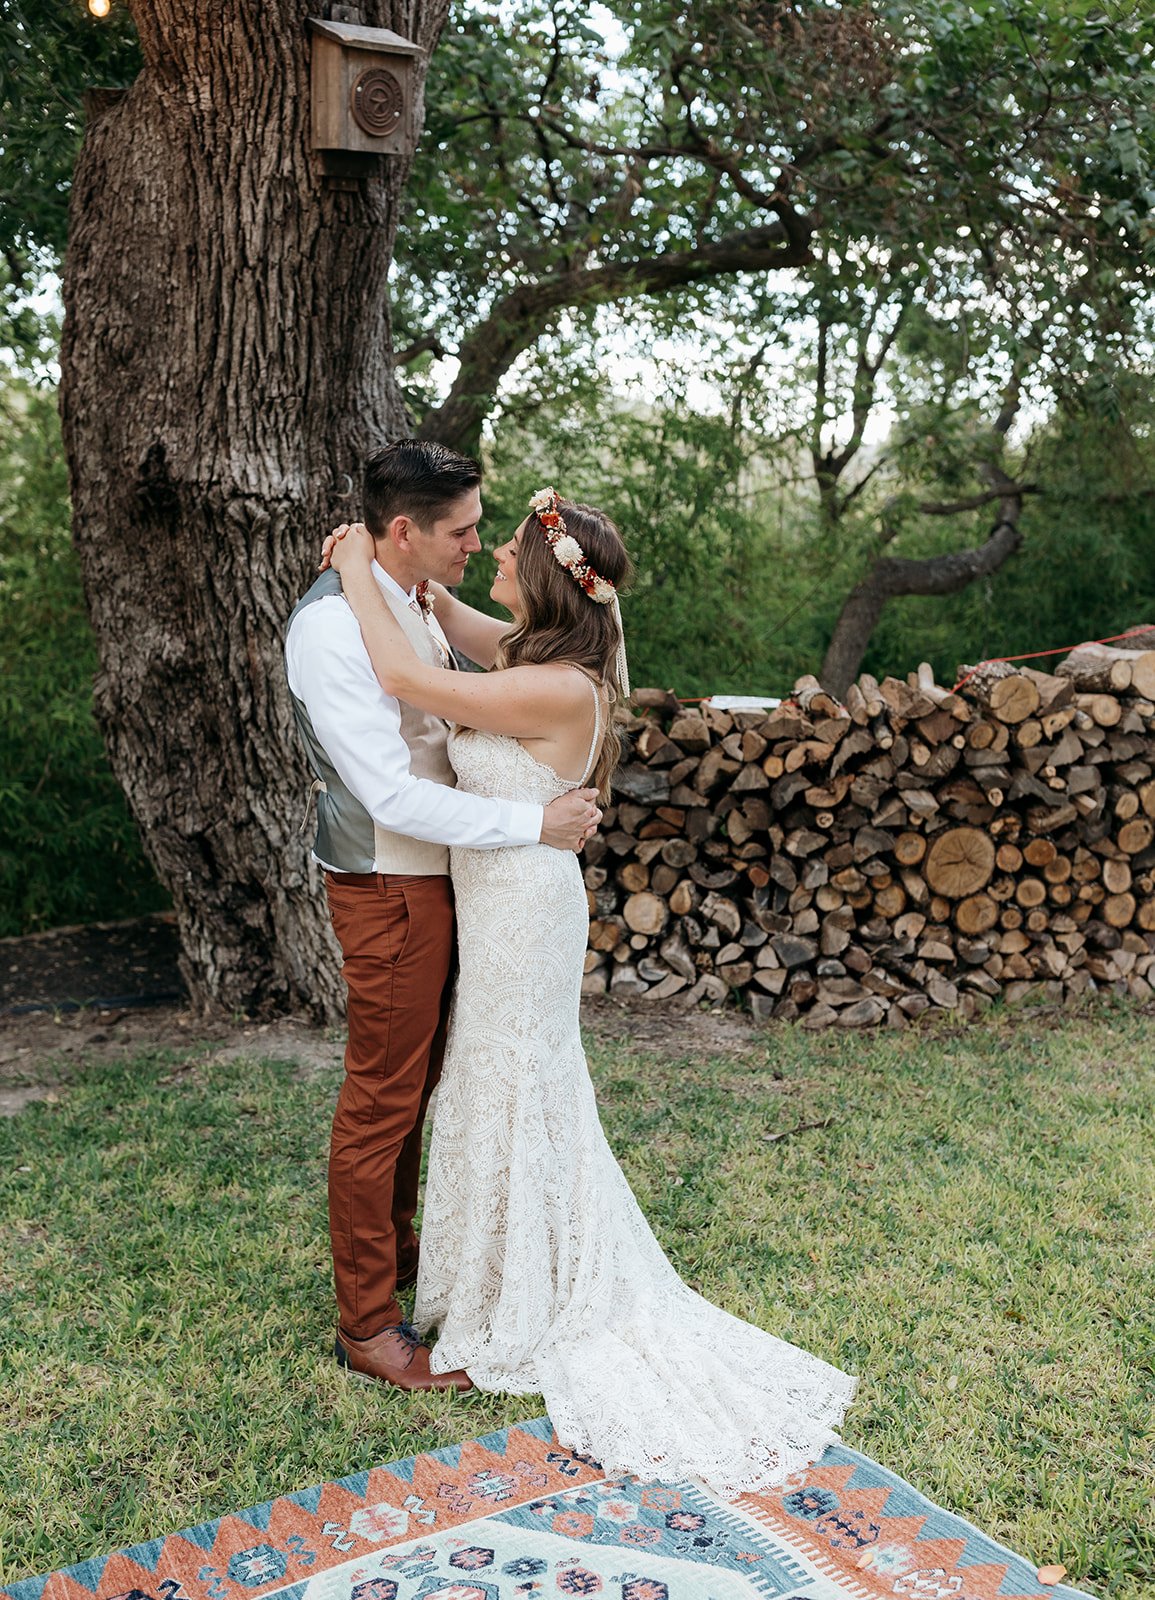 Leah and James embracing at the intimate outdoor ceremony site at Baron's Creek Camp